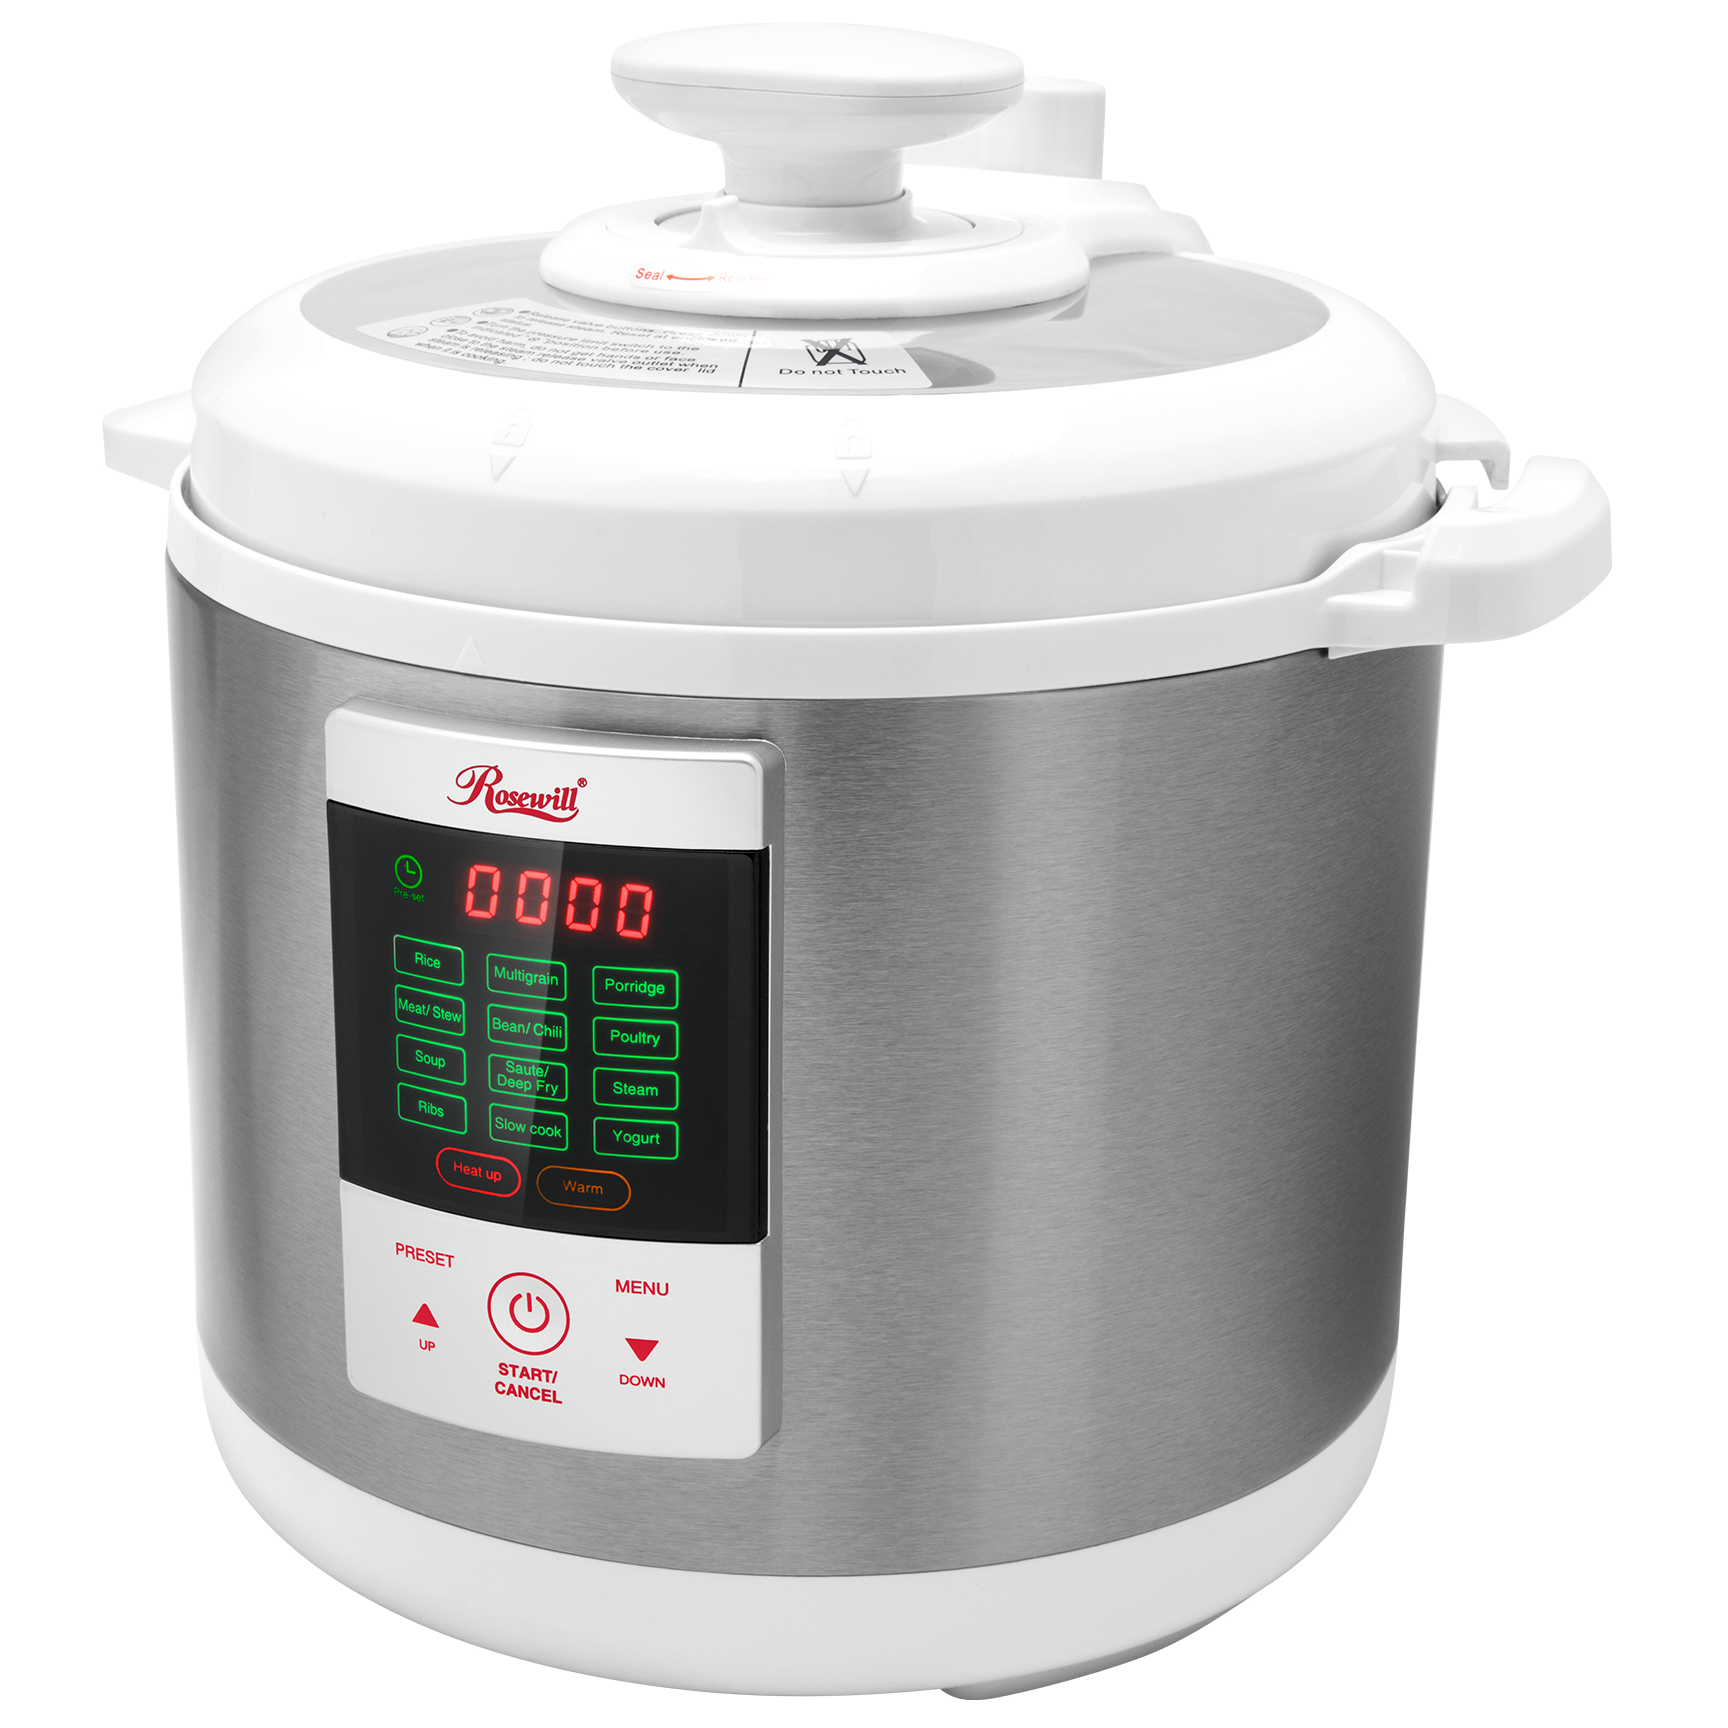 Rosewill RHPC-15001 Programmable 6.3 Quart 1000W Electric Pressure Cooker - image 1 of 7